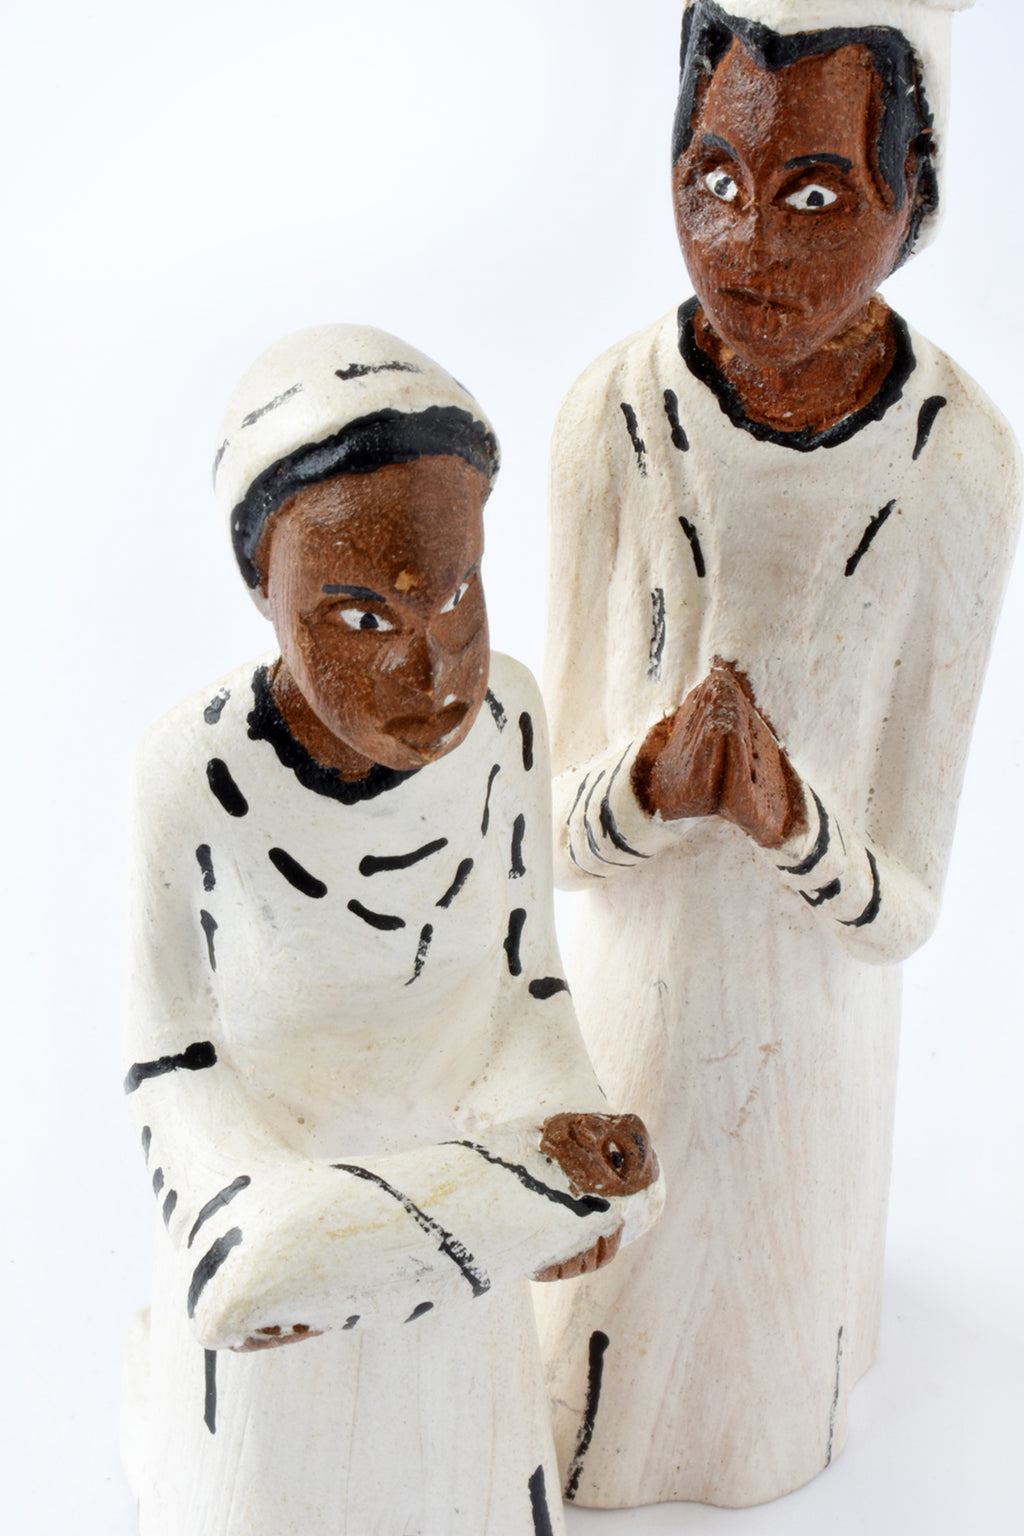 Dino's Hand Painted Wooden Nativity Scene from Mozambique